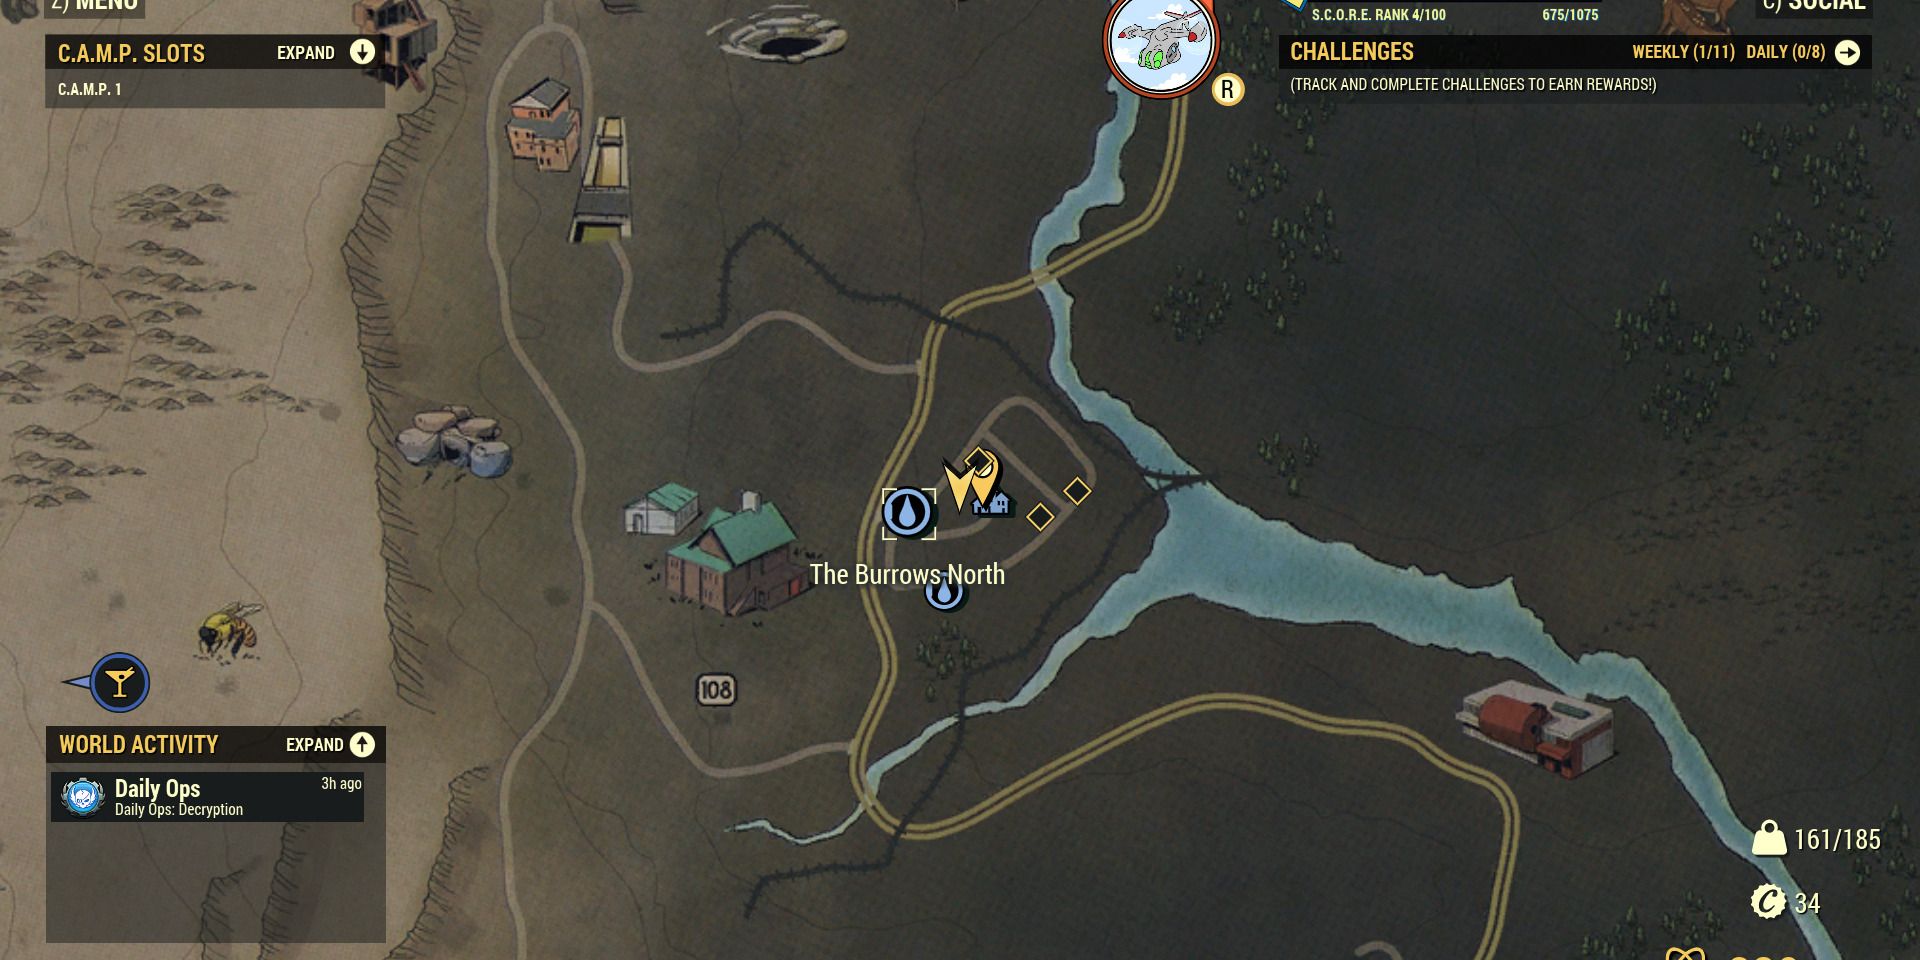 Image of the location on the map of the Burrows North in Fallout 76